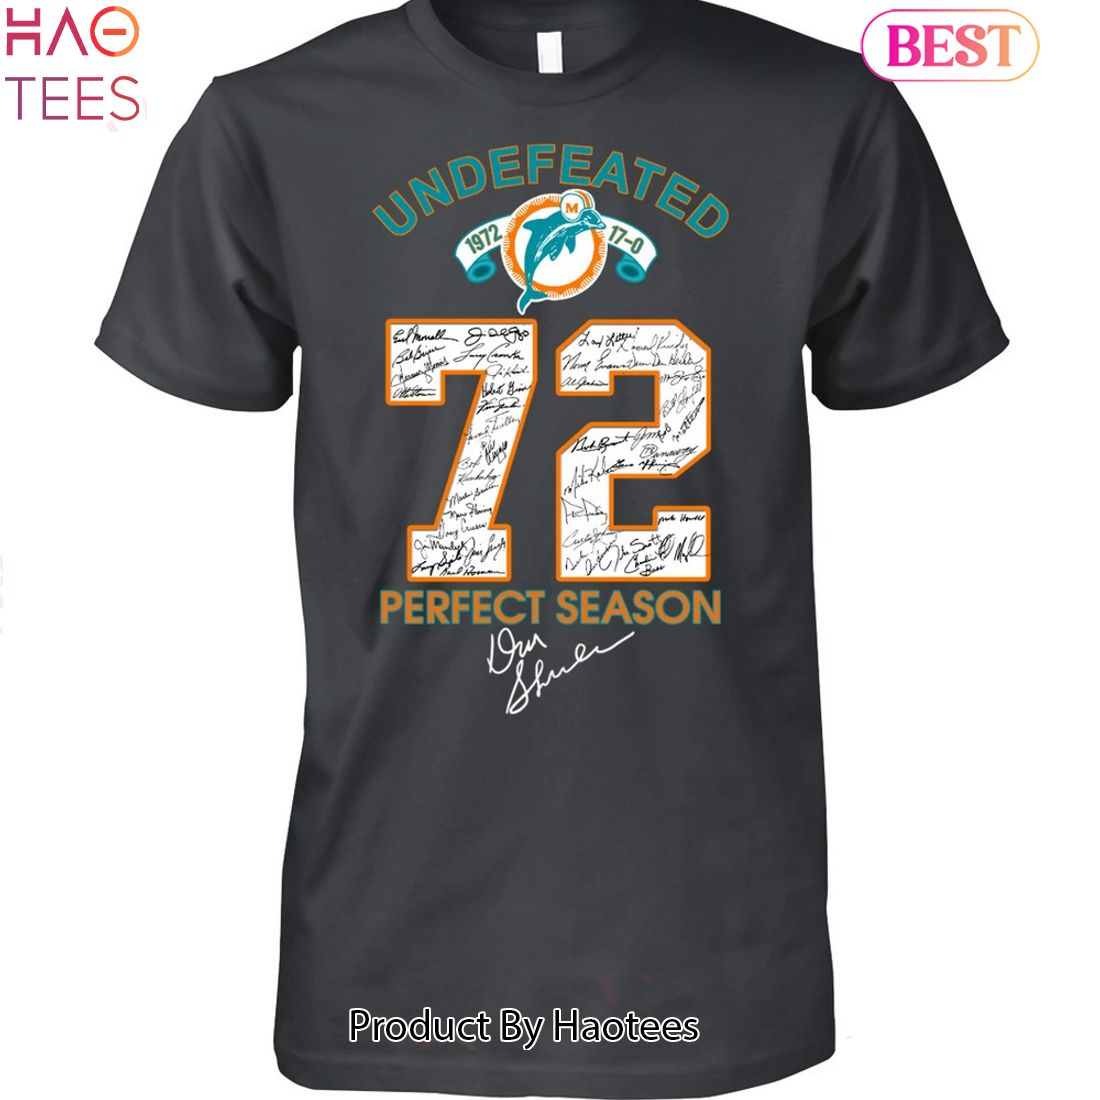 1972 undefeated dolphins